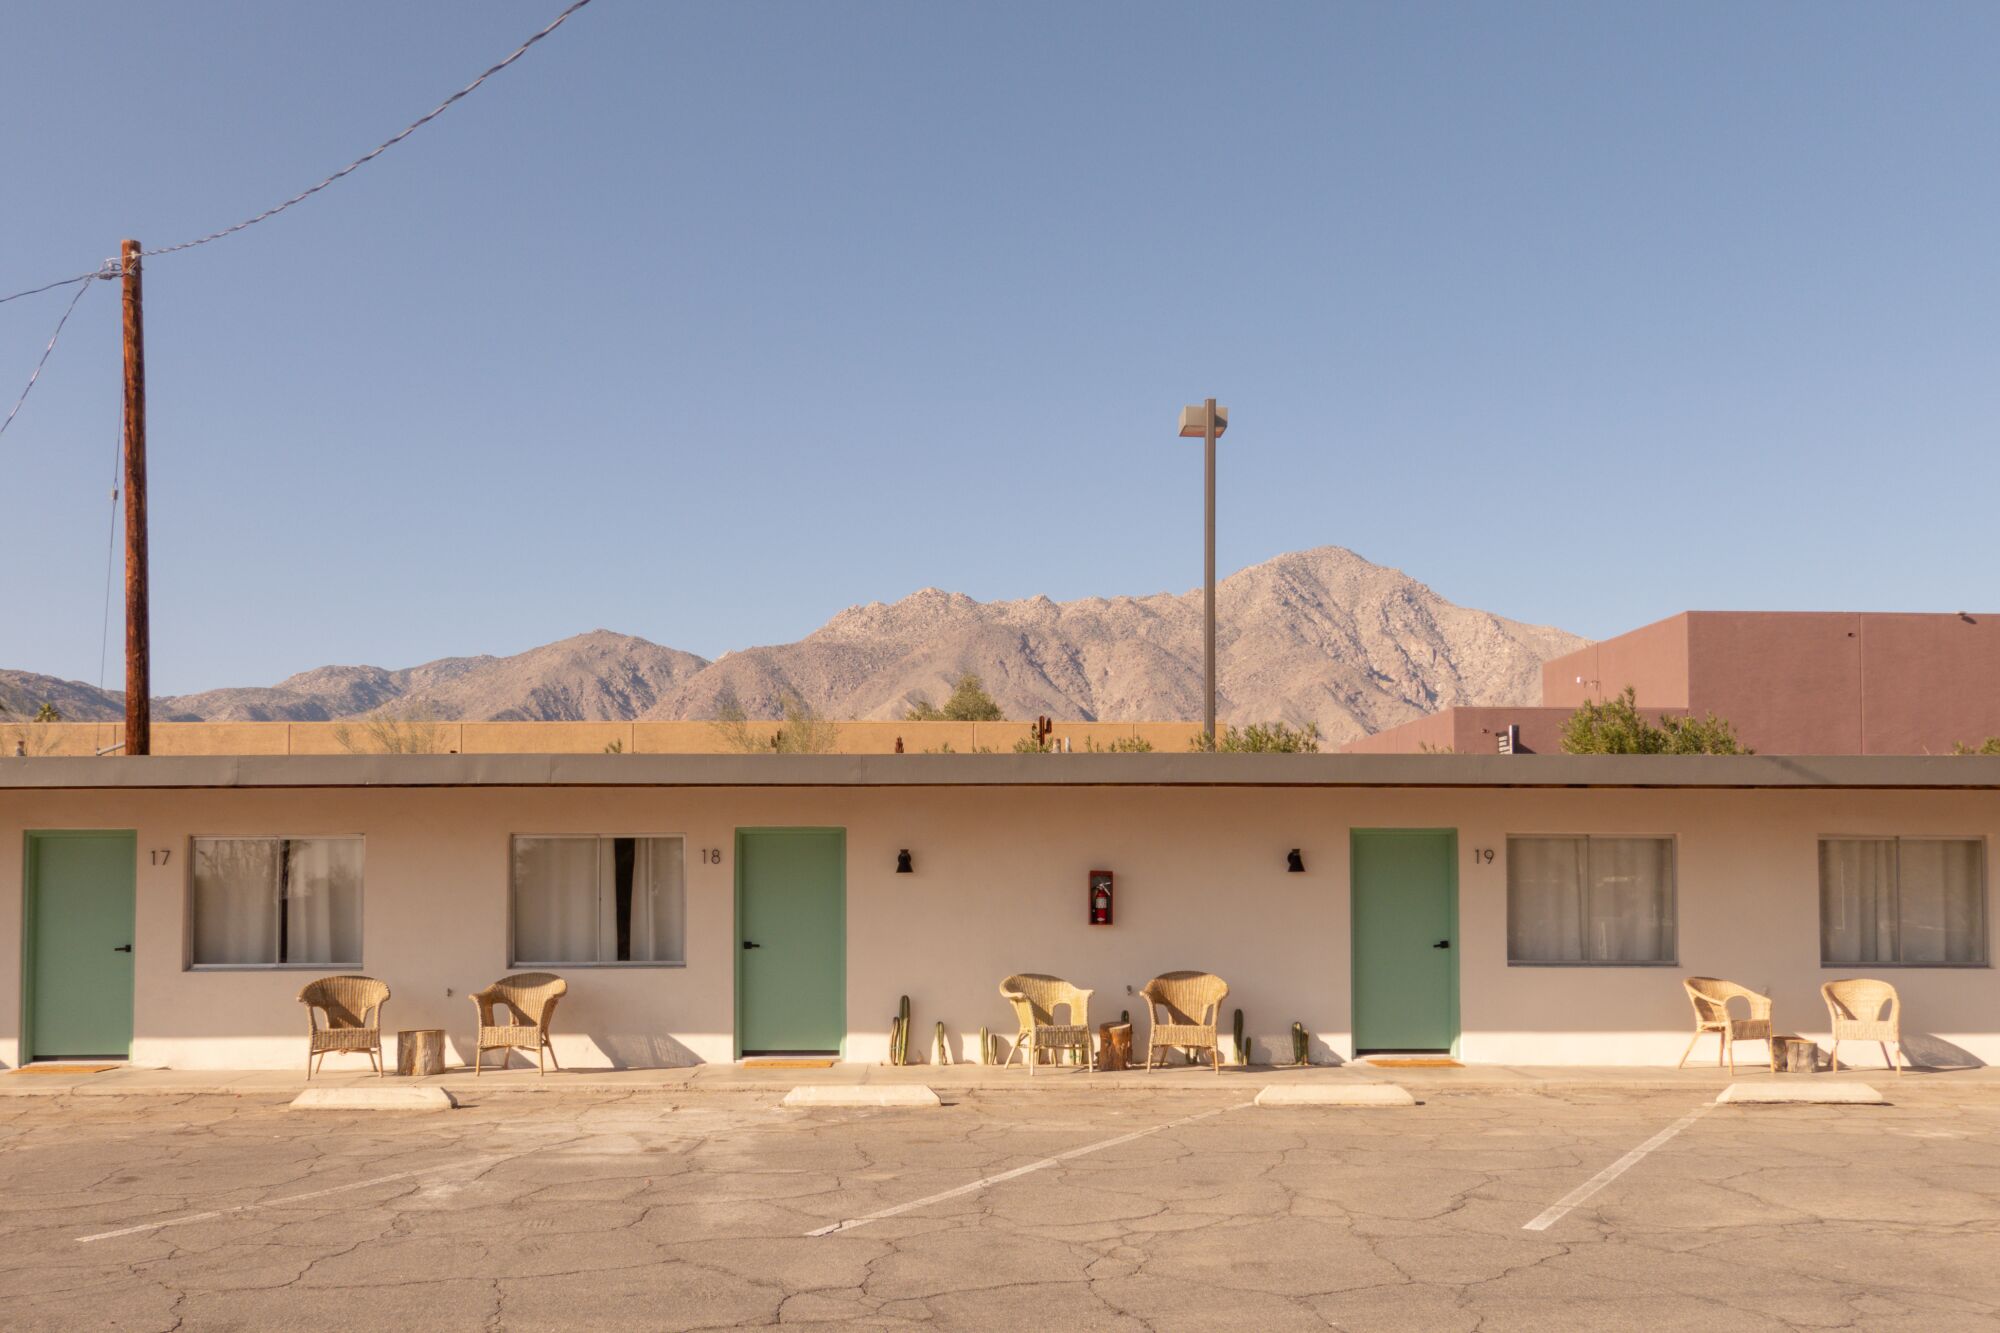 A view of a low-slung motel building with green doors, set against a vista of desert mountains.